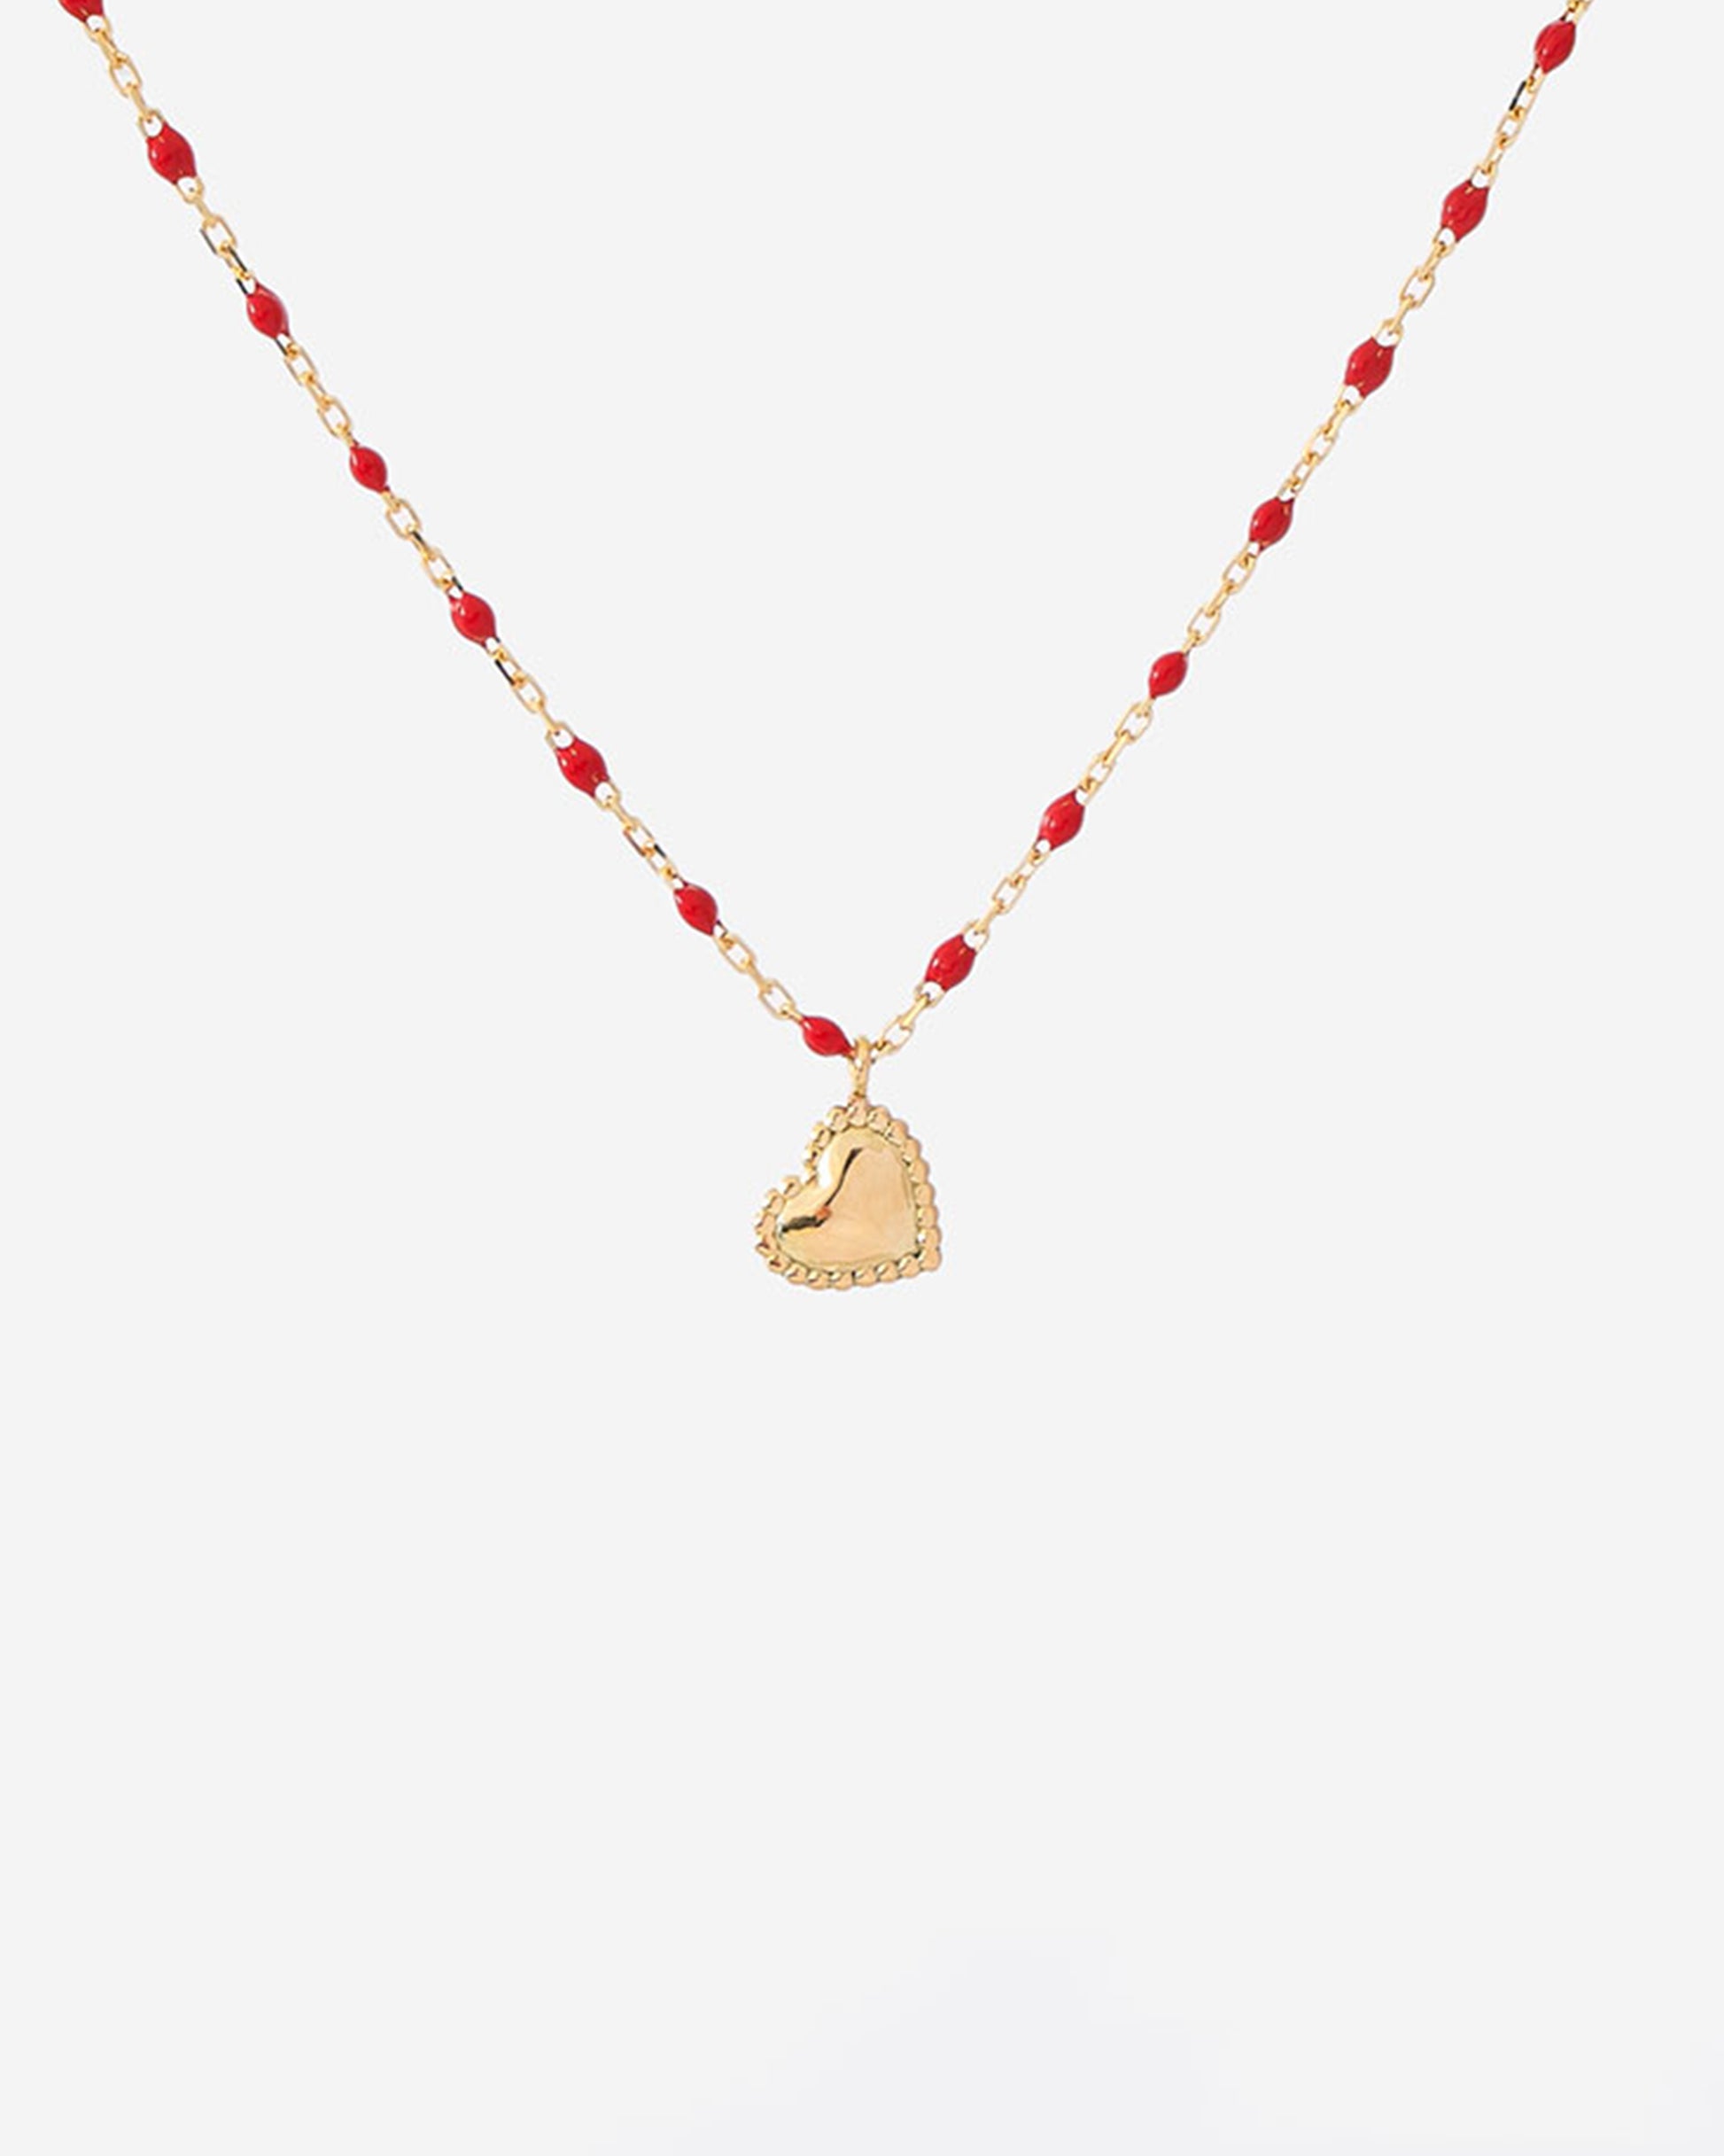 A thin yellow gold chain necklace with mini poppy red resin beads and a little dangling heart pendant.